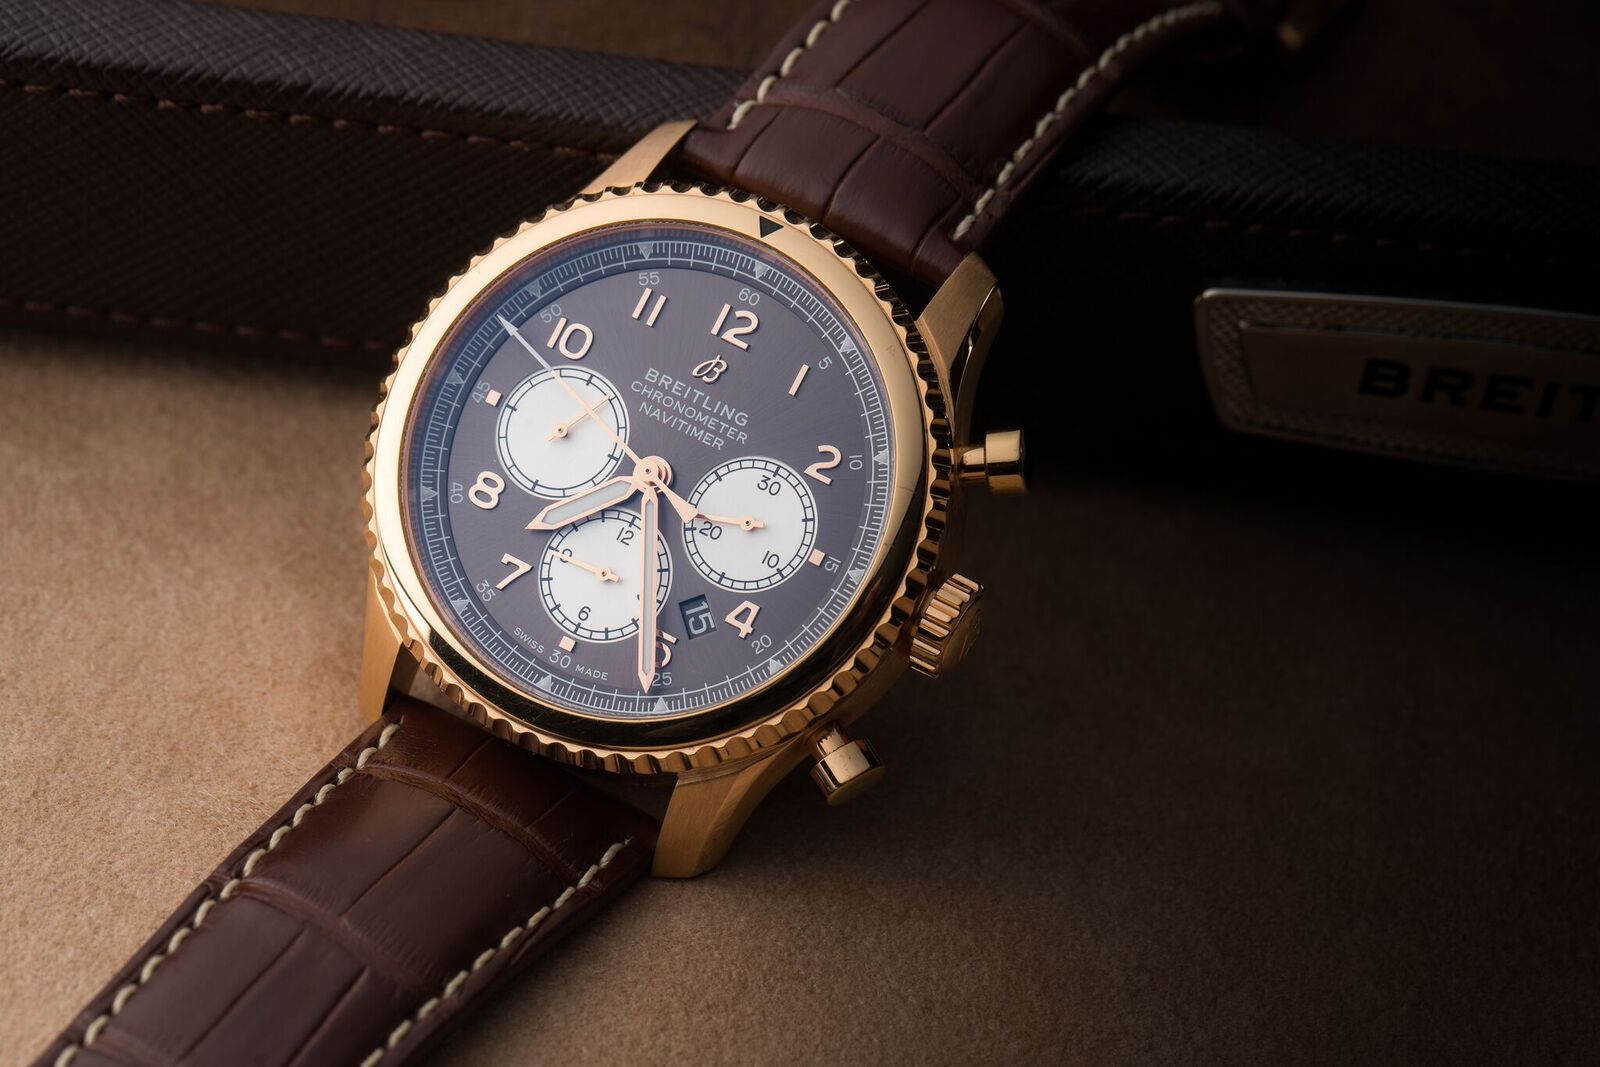 Watch Of The Week: Breitling Navitimer 8 B01 Chronograph 43